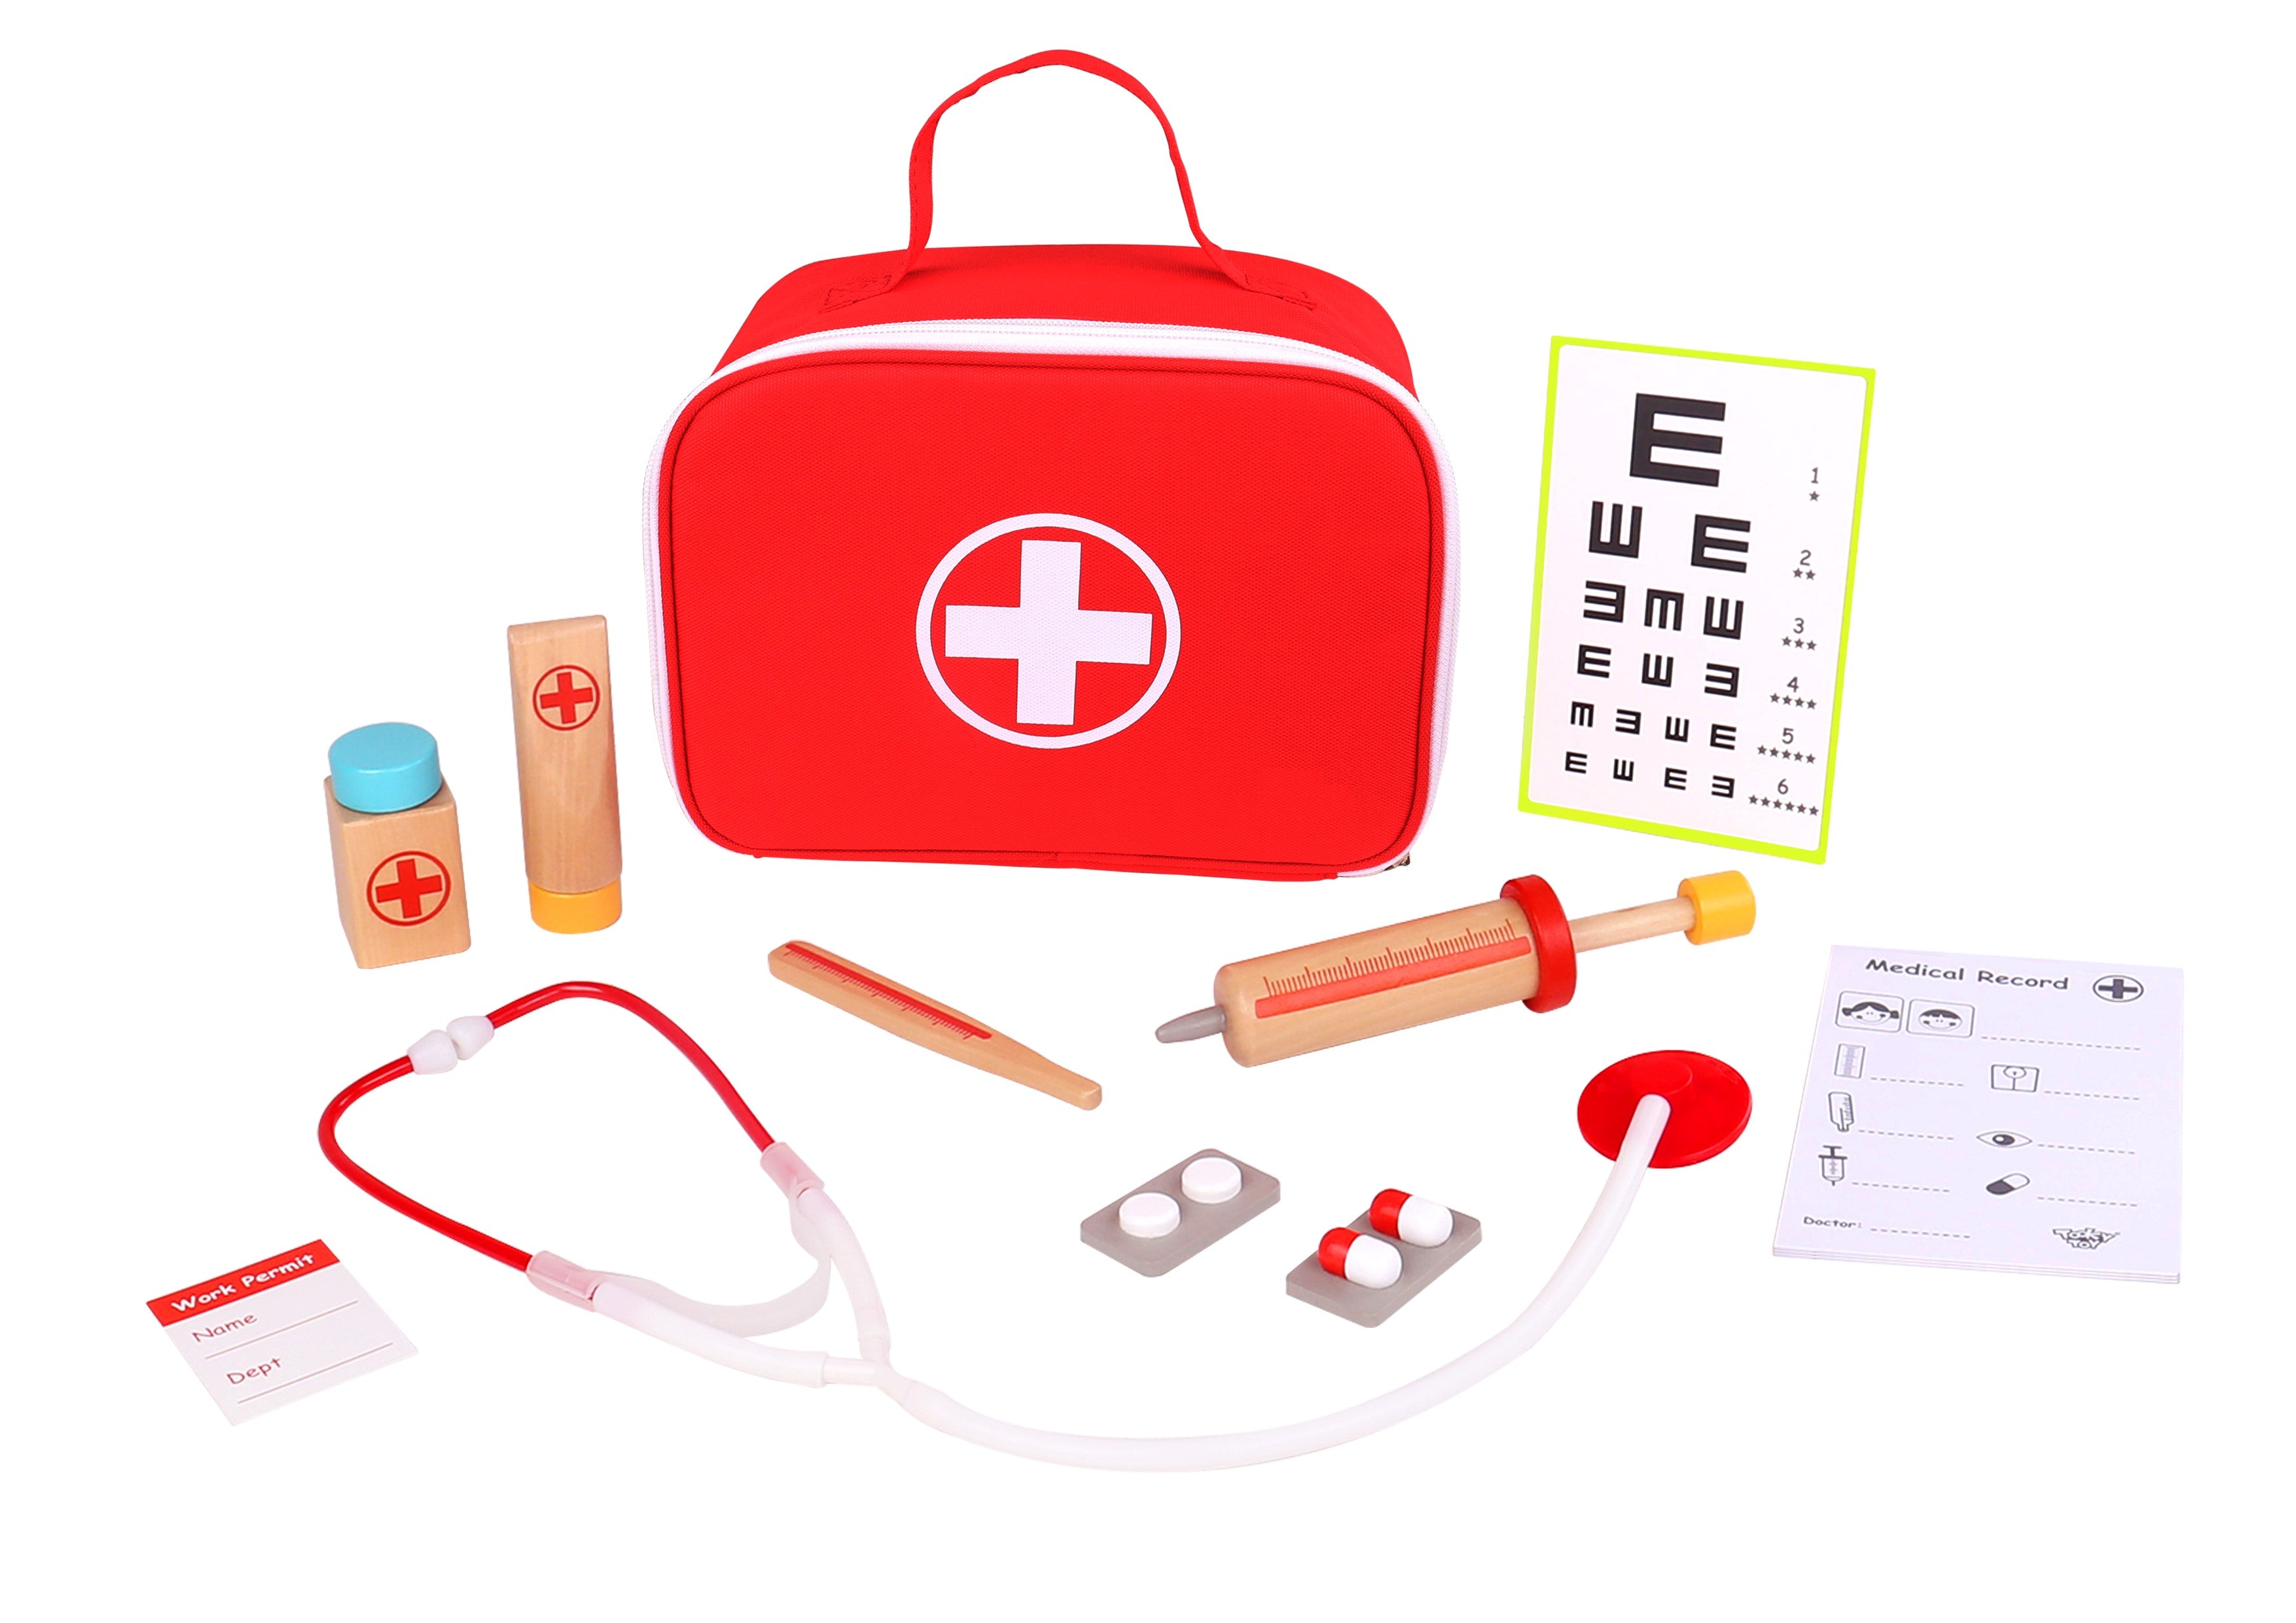 Toysters Doctor Kit for Kids